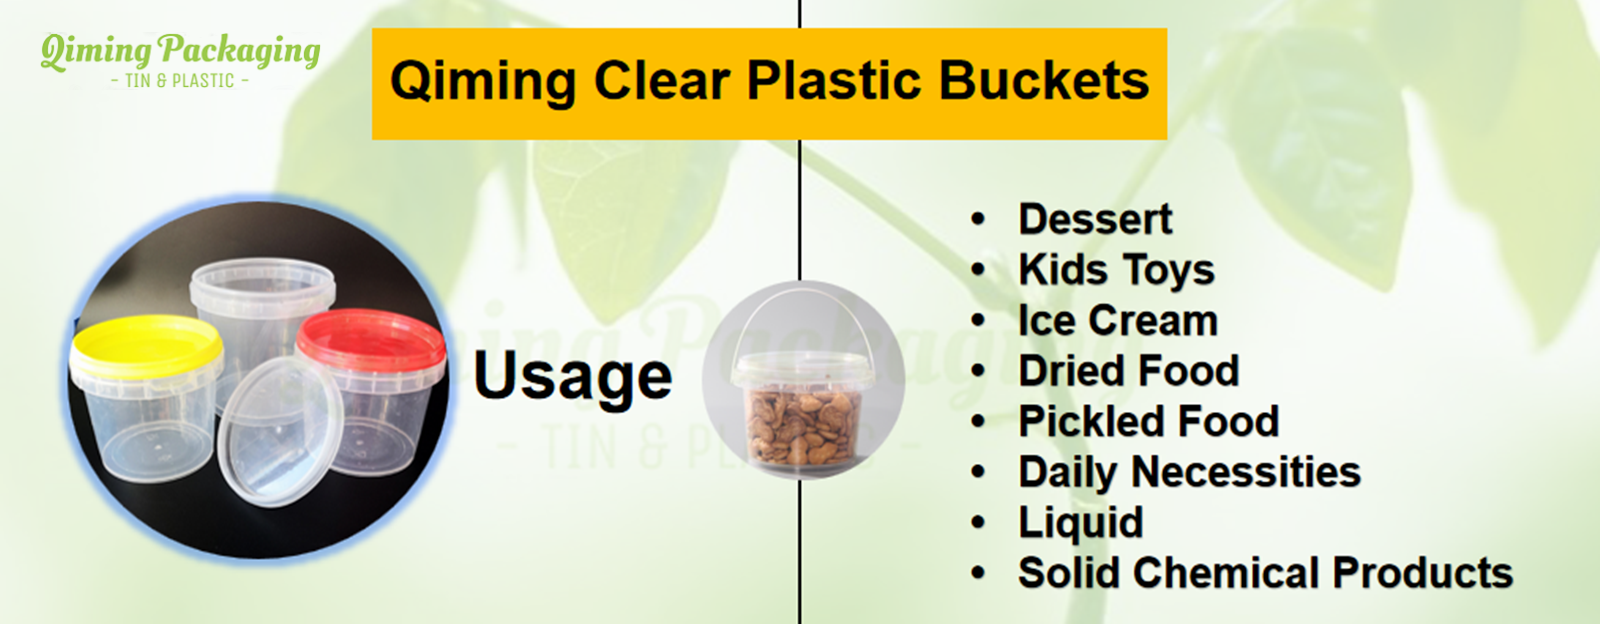 clear plastic buckets